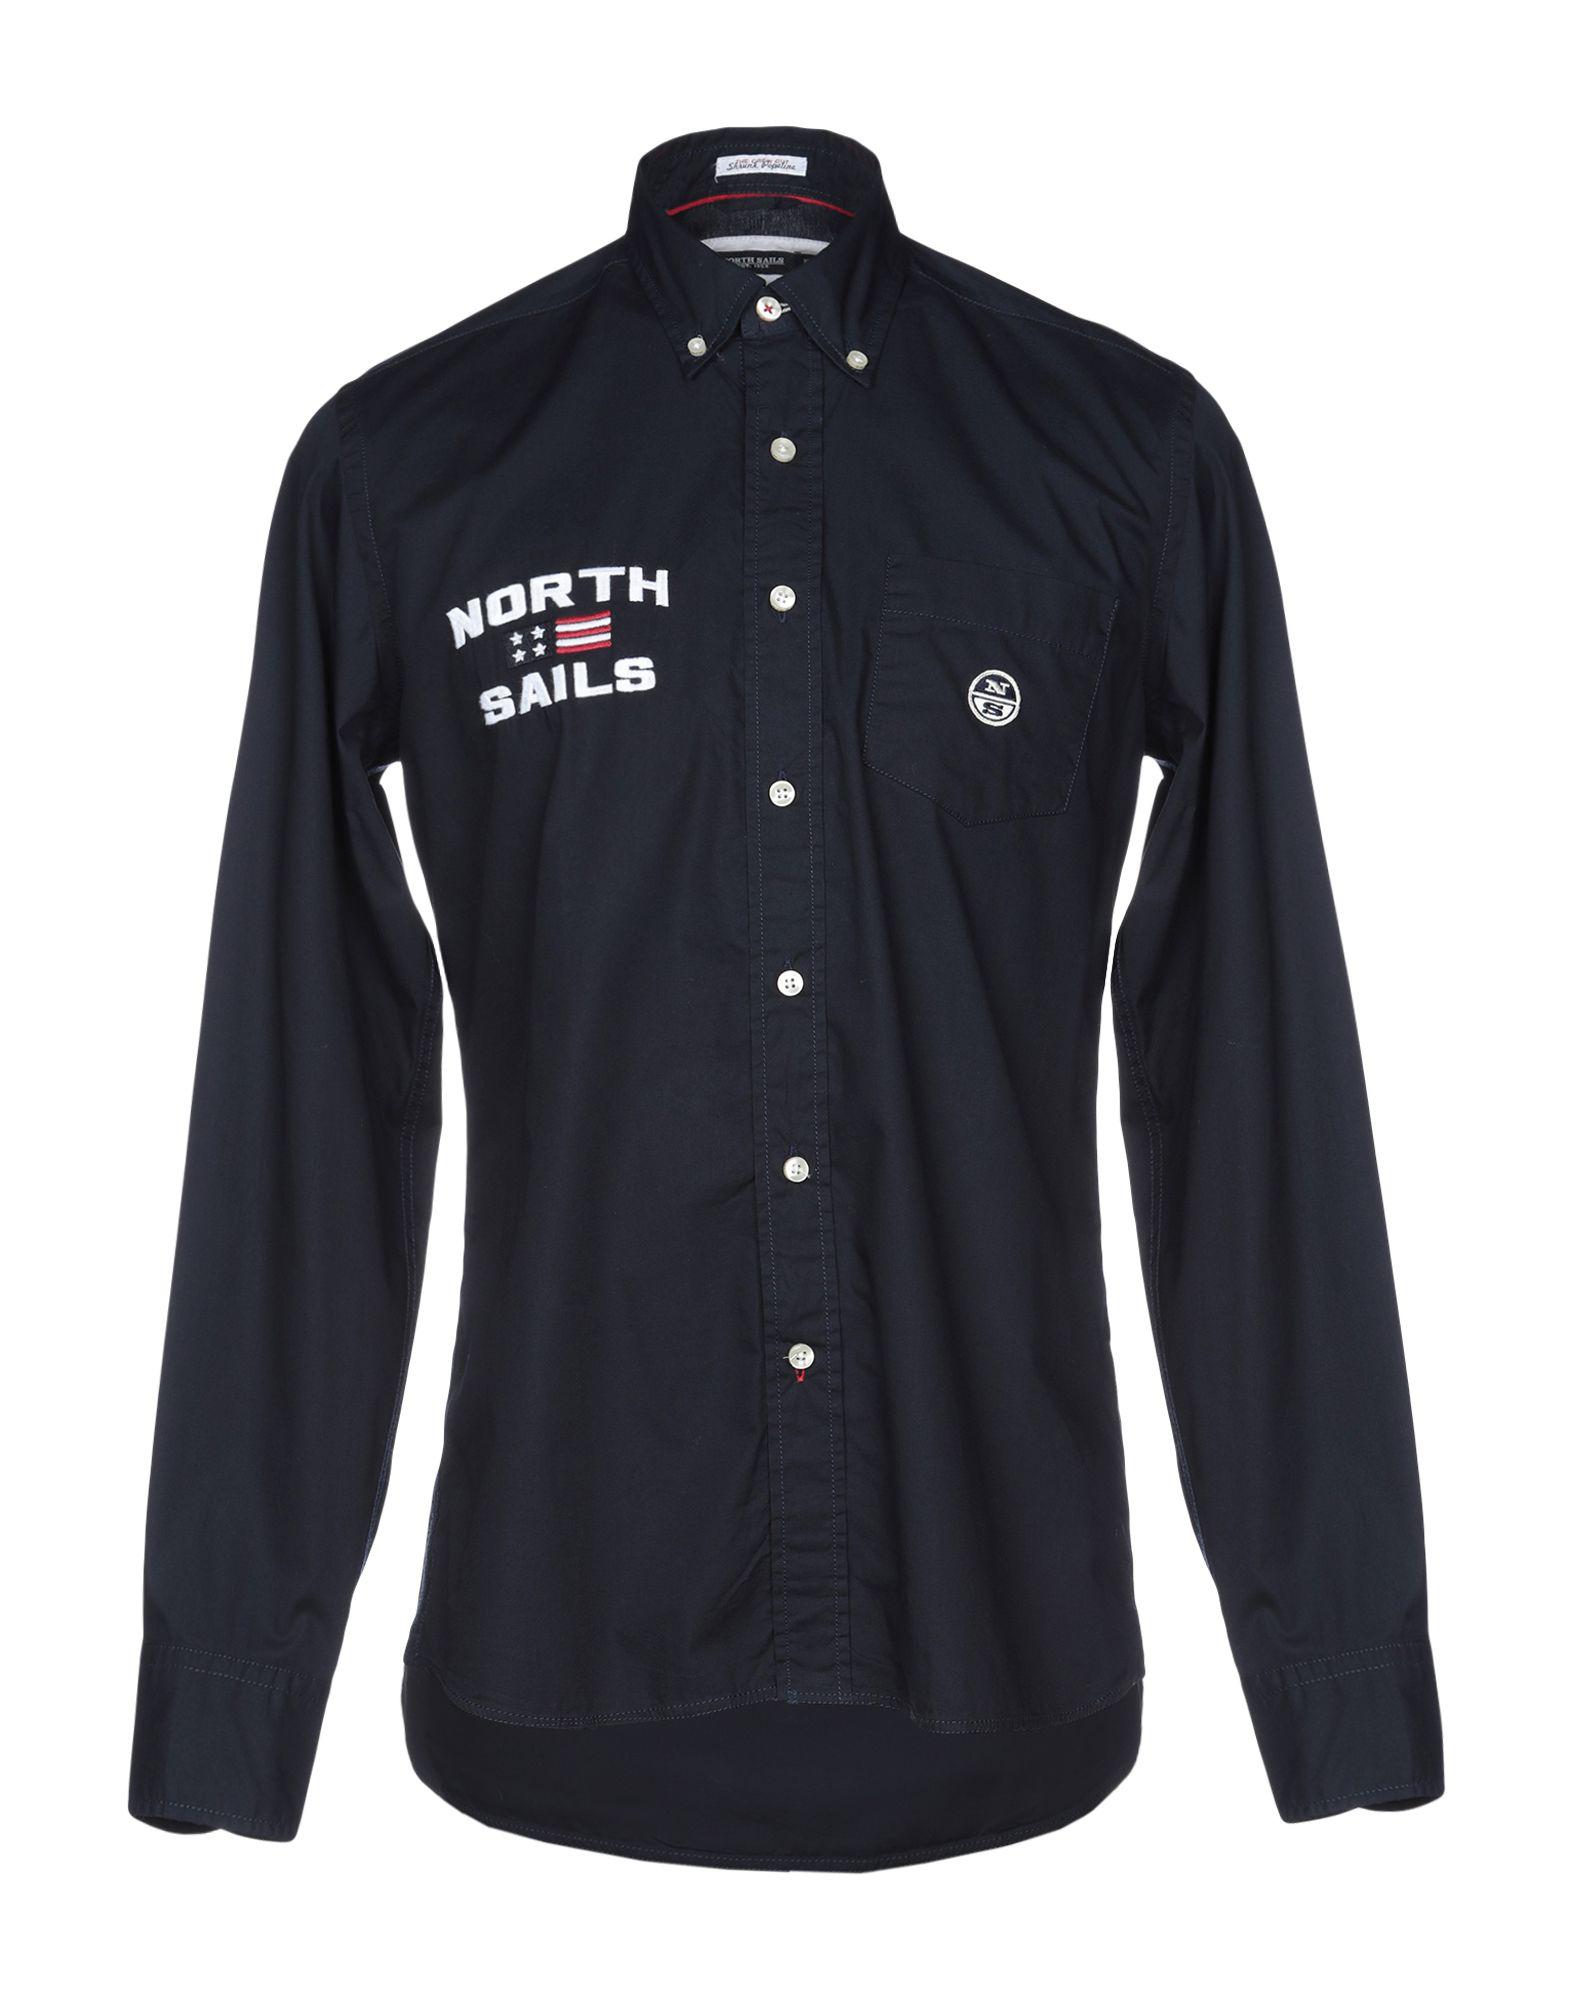 North Sails Shirt in Blue for Men - Lyst